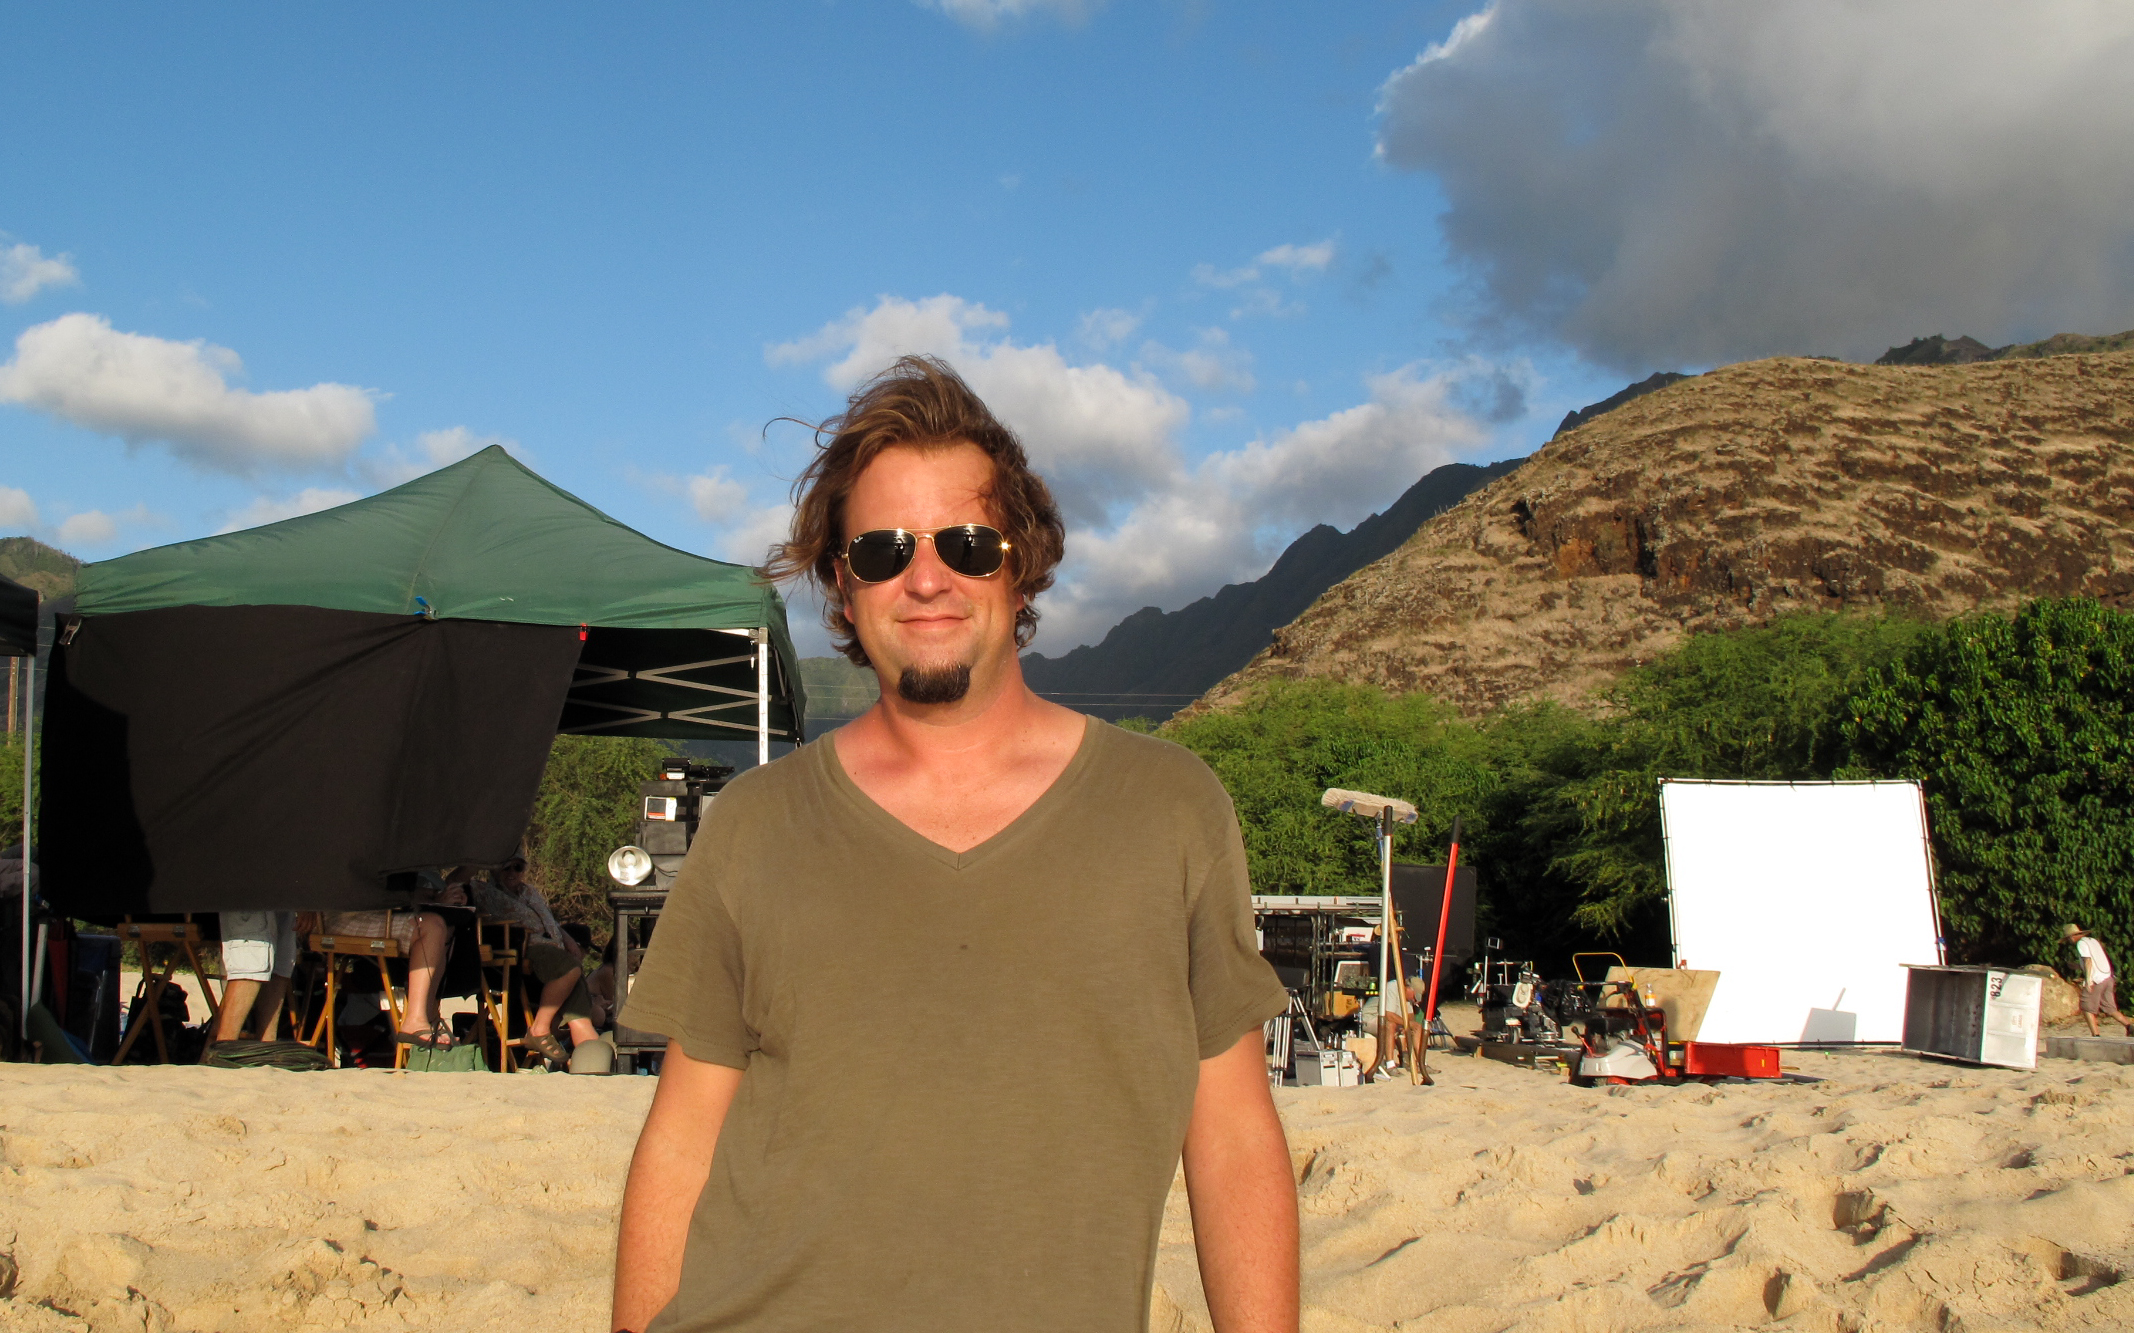 On location in Oahu filming Lost.